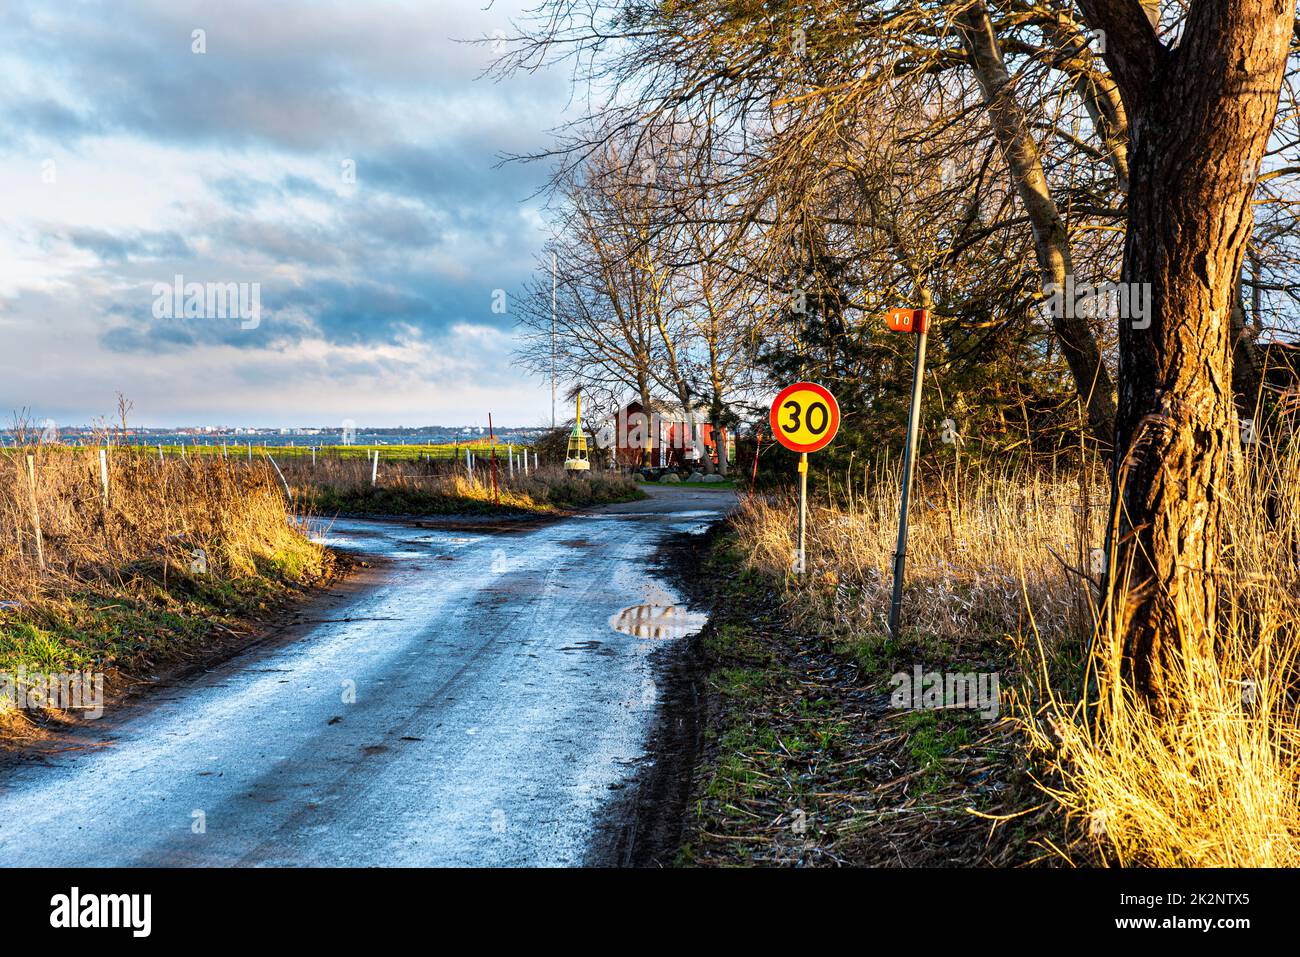 Countryside narrow road by the sea after a winter rain fall. Gloomy sky reflecting in a puddle conveys a sense of melancholy, solitude and loneliness Stock Photo